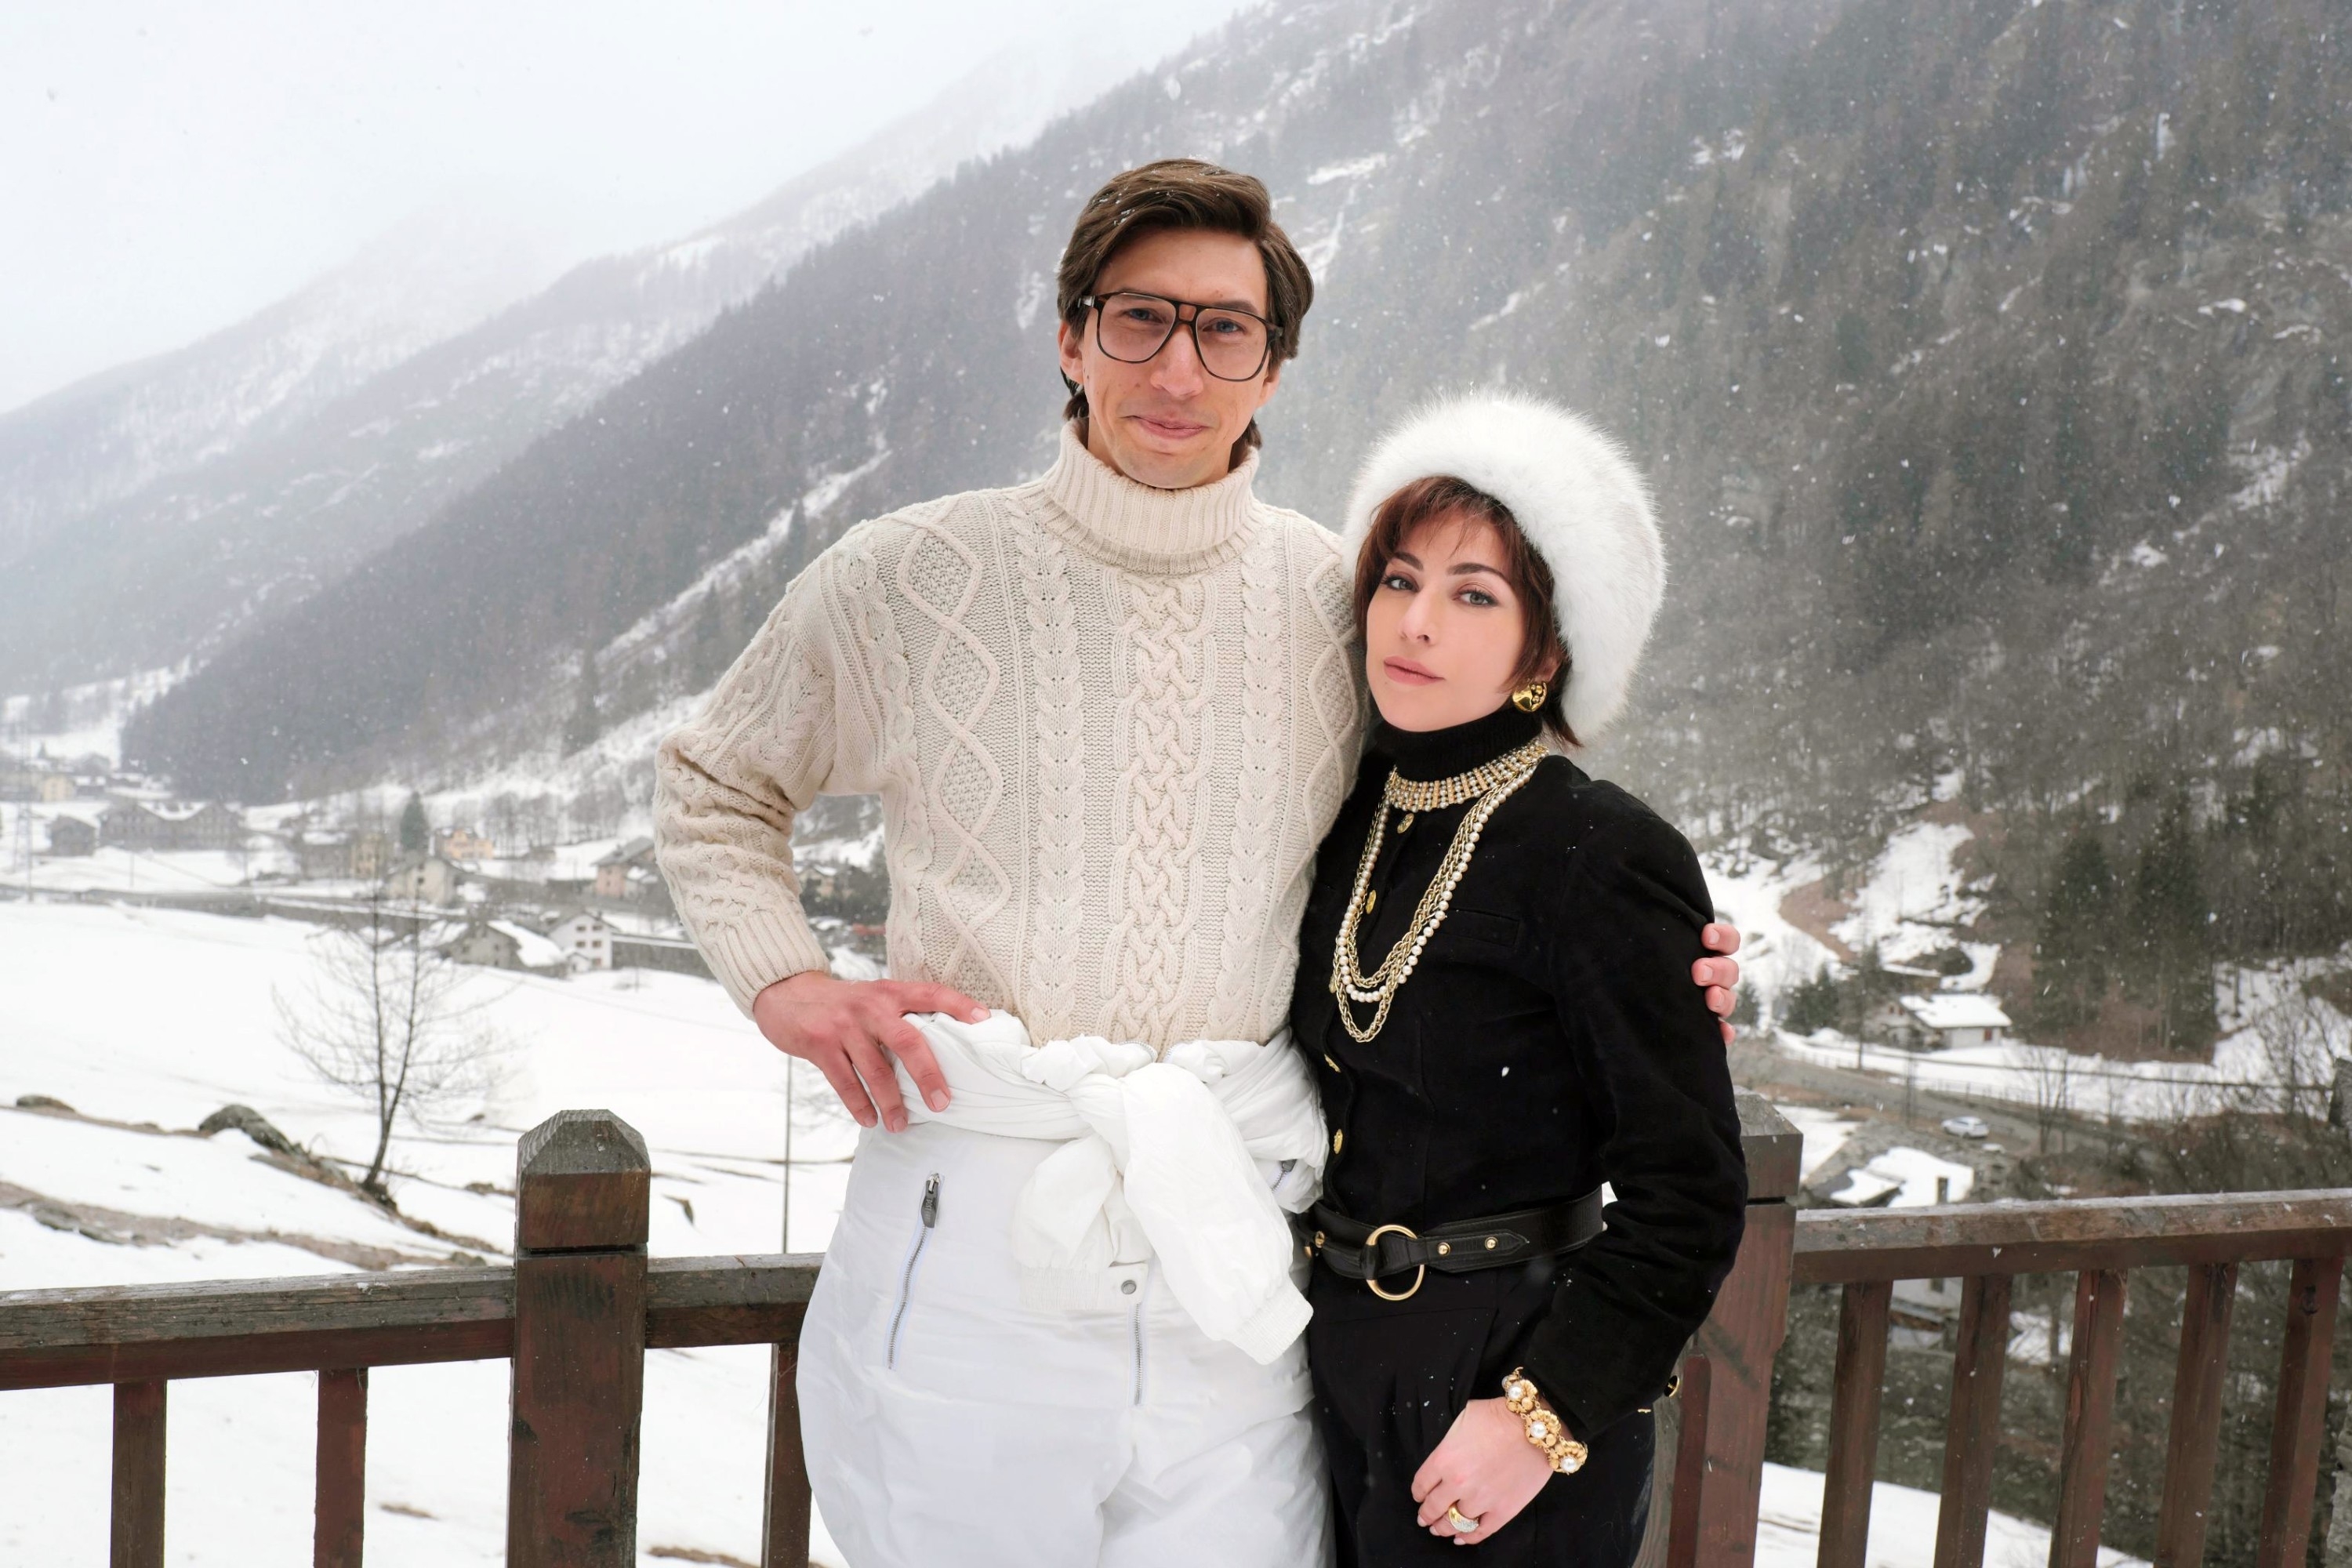 him and lady gaga in the snow